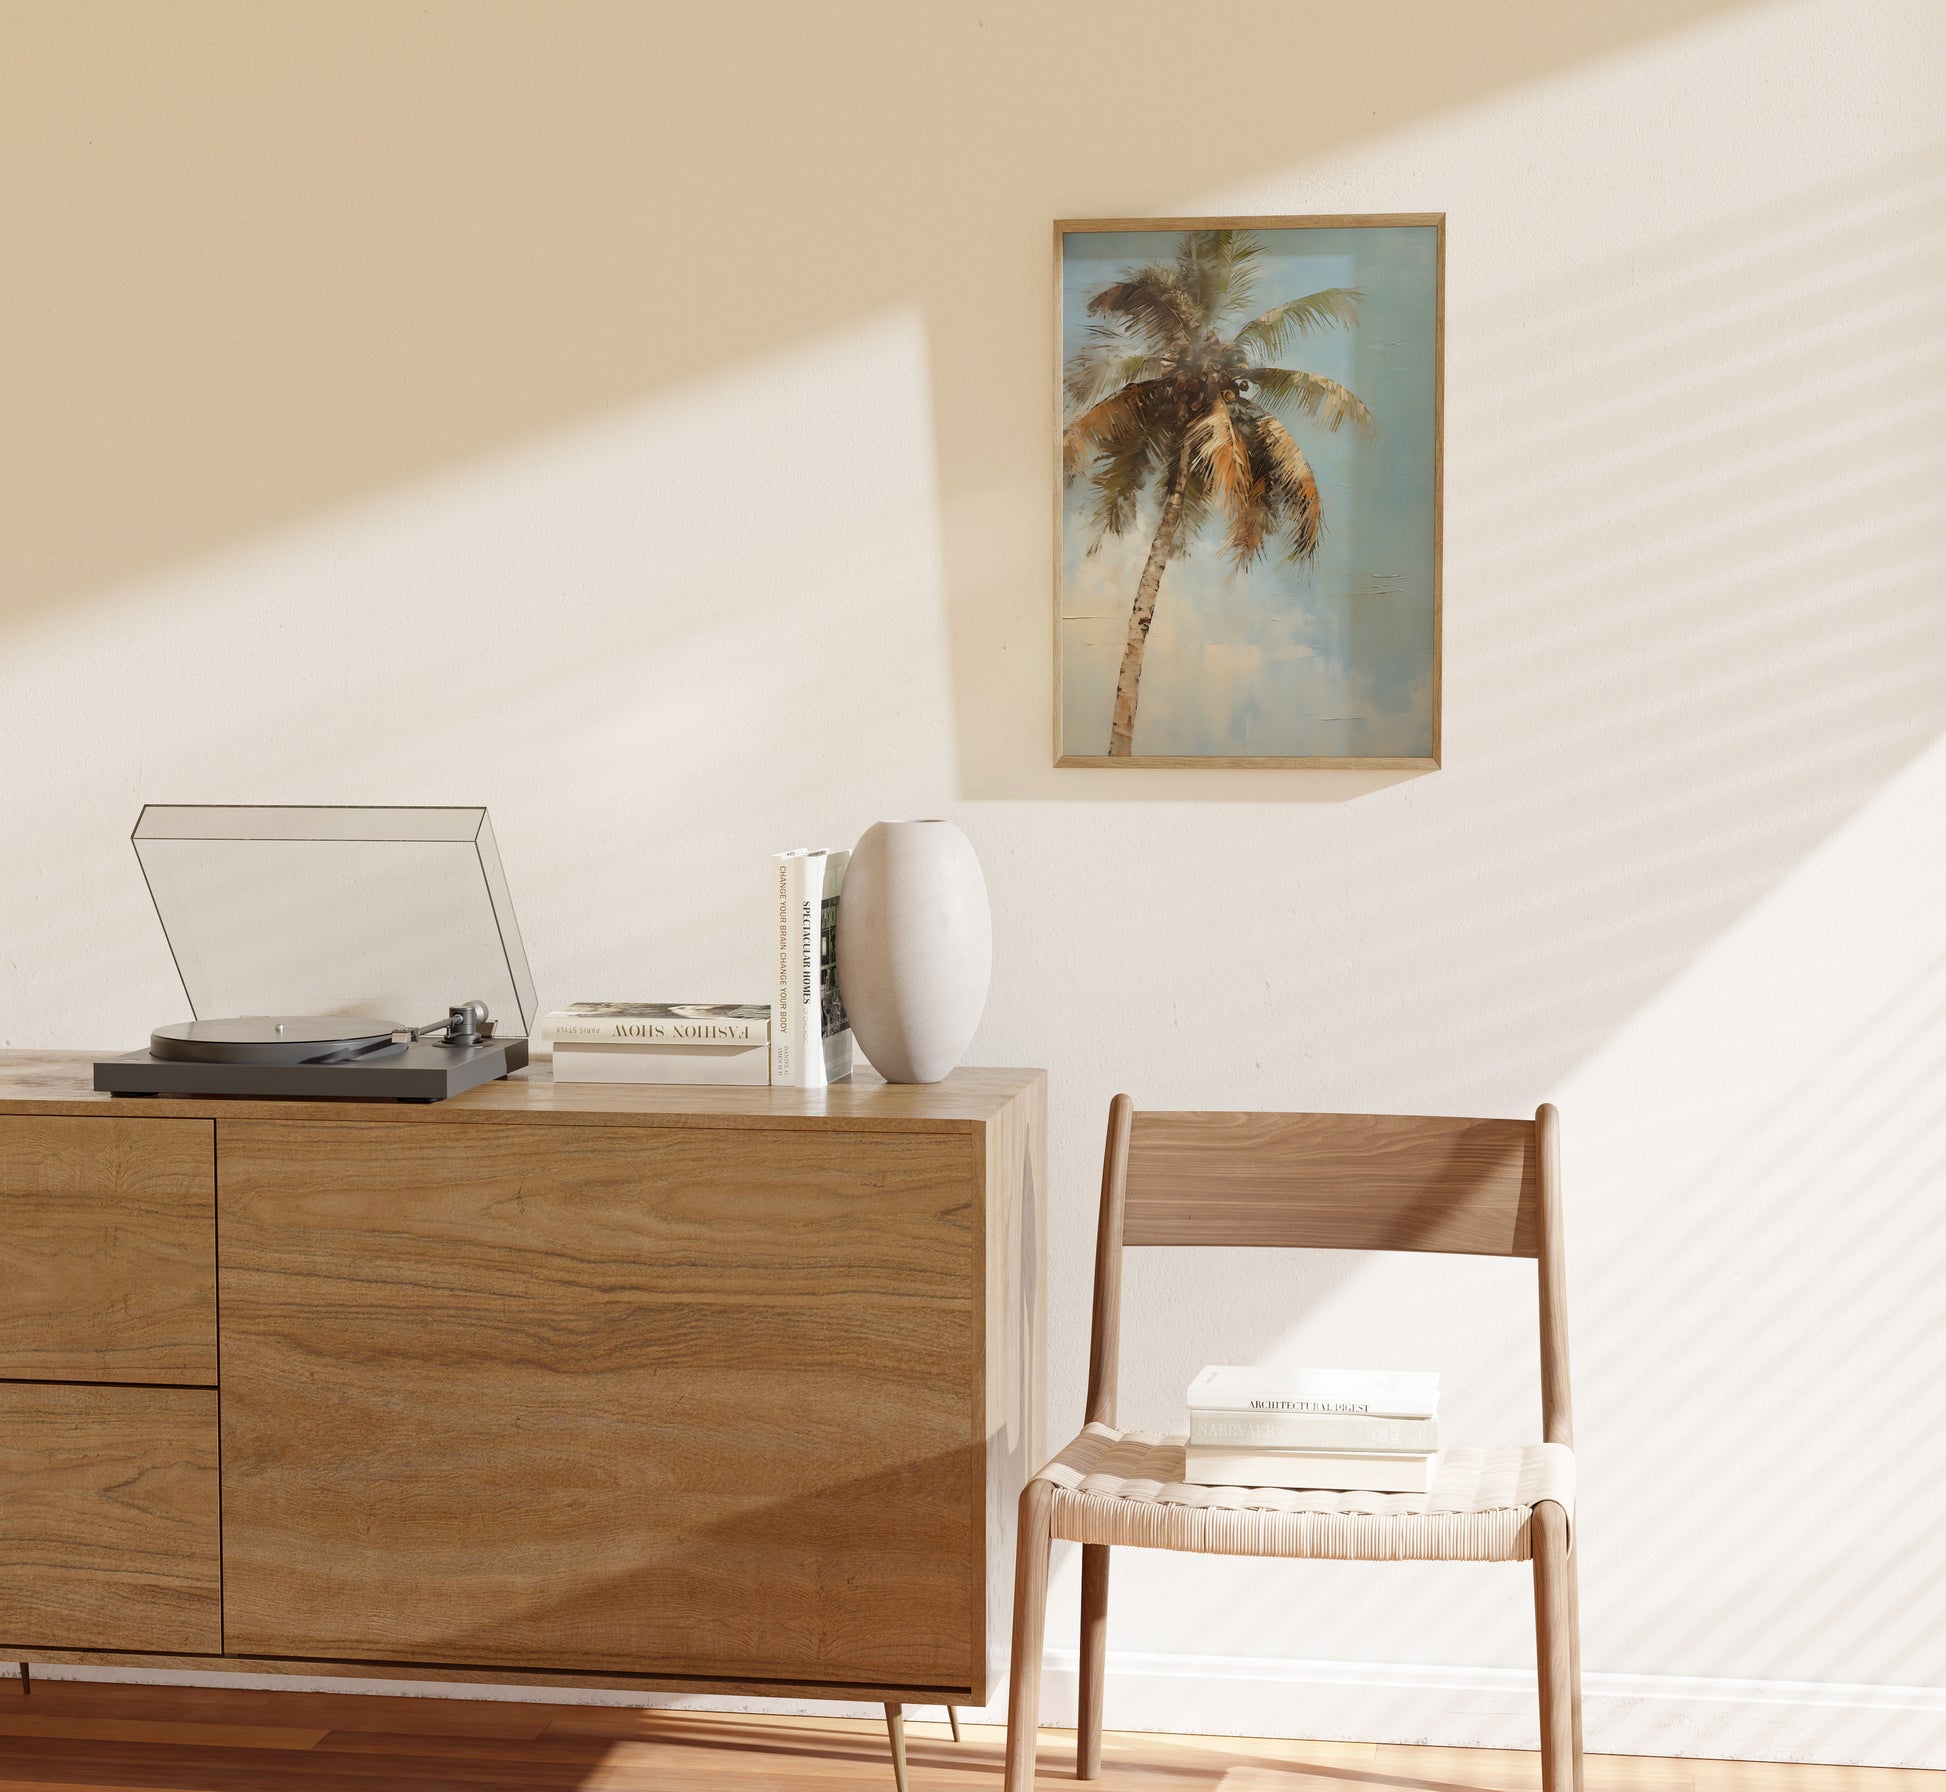 A cozy room with a record player on a wooden cabinet, a chair, and a framed palm tree painting on the wall.